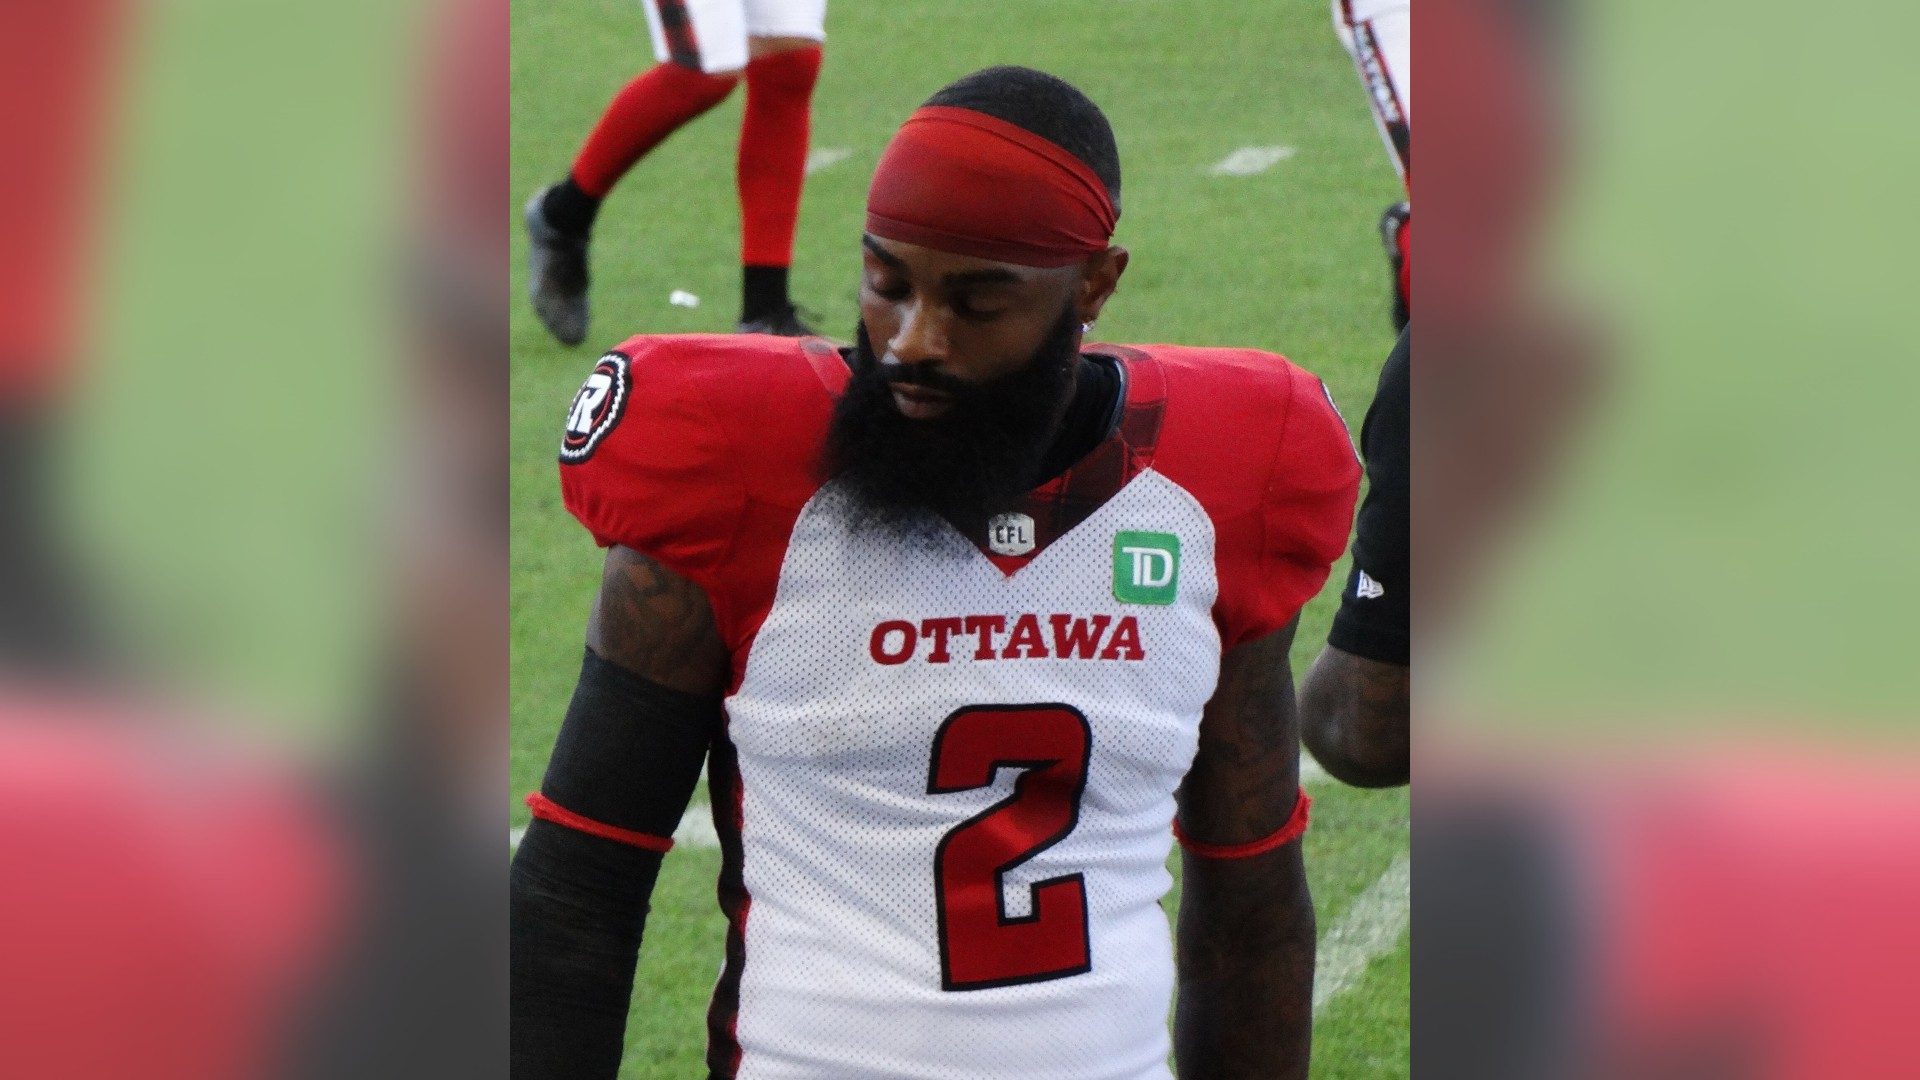 Redblacks re-sign Justin Hardy to a one-year deal, drops Behar